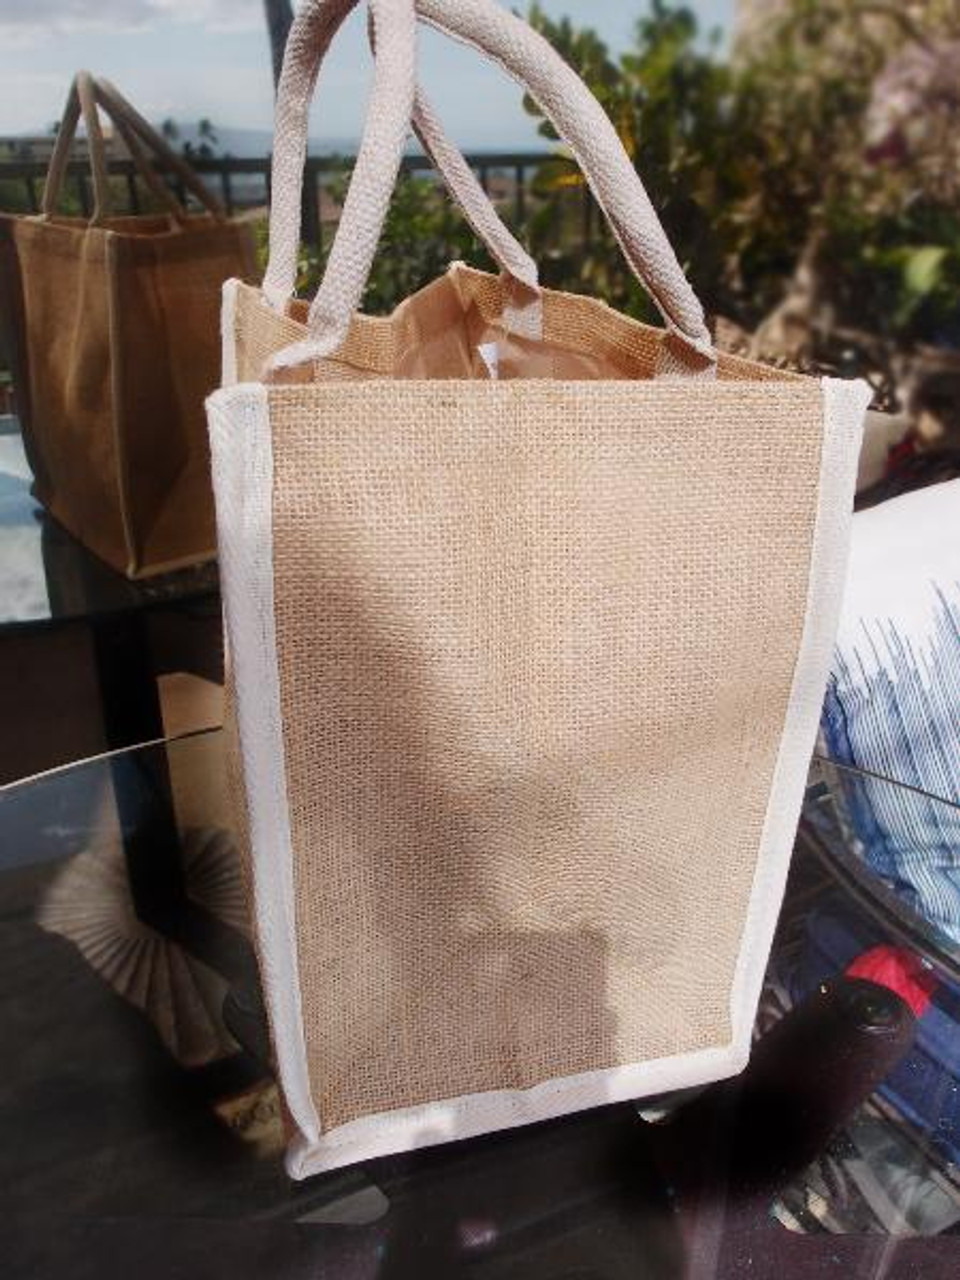 Promote Your Business with Customized Burlap or Jute Bags | Ludlow Jute